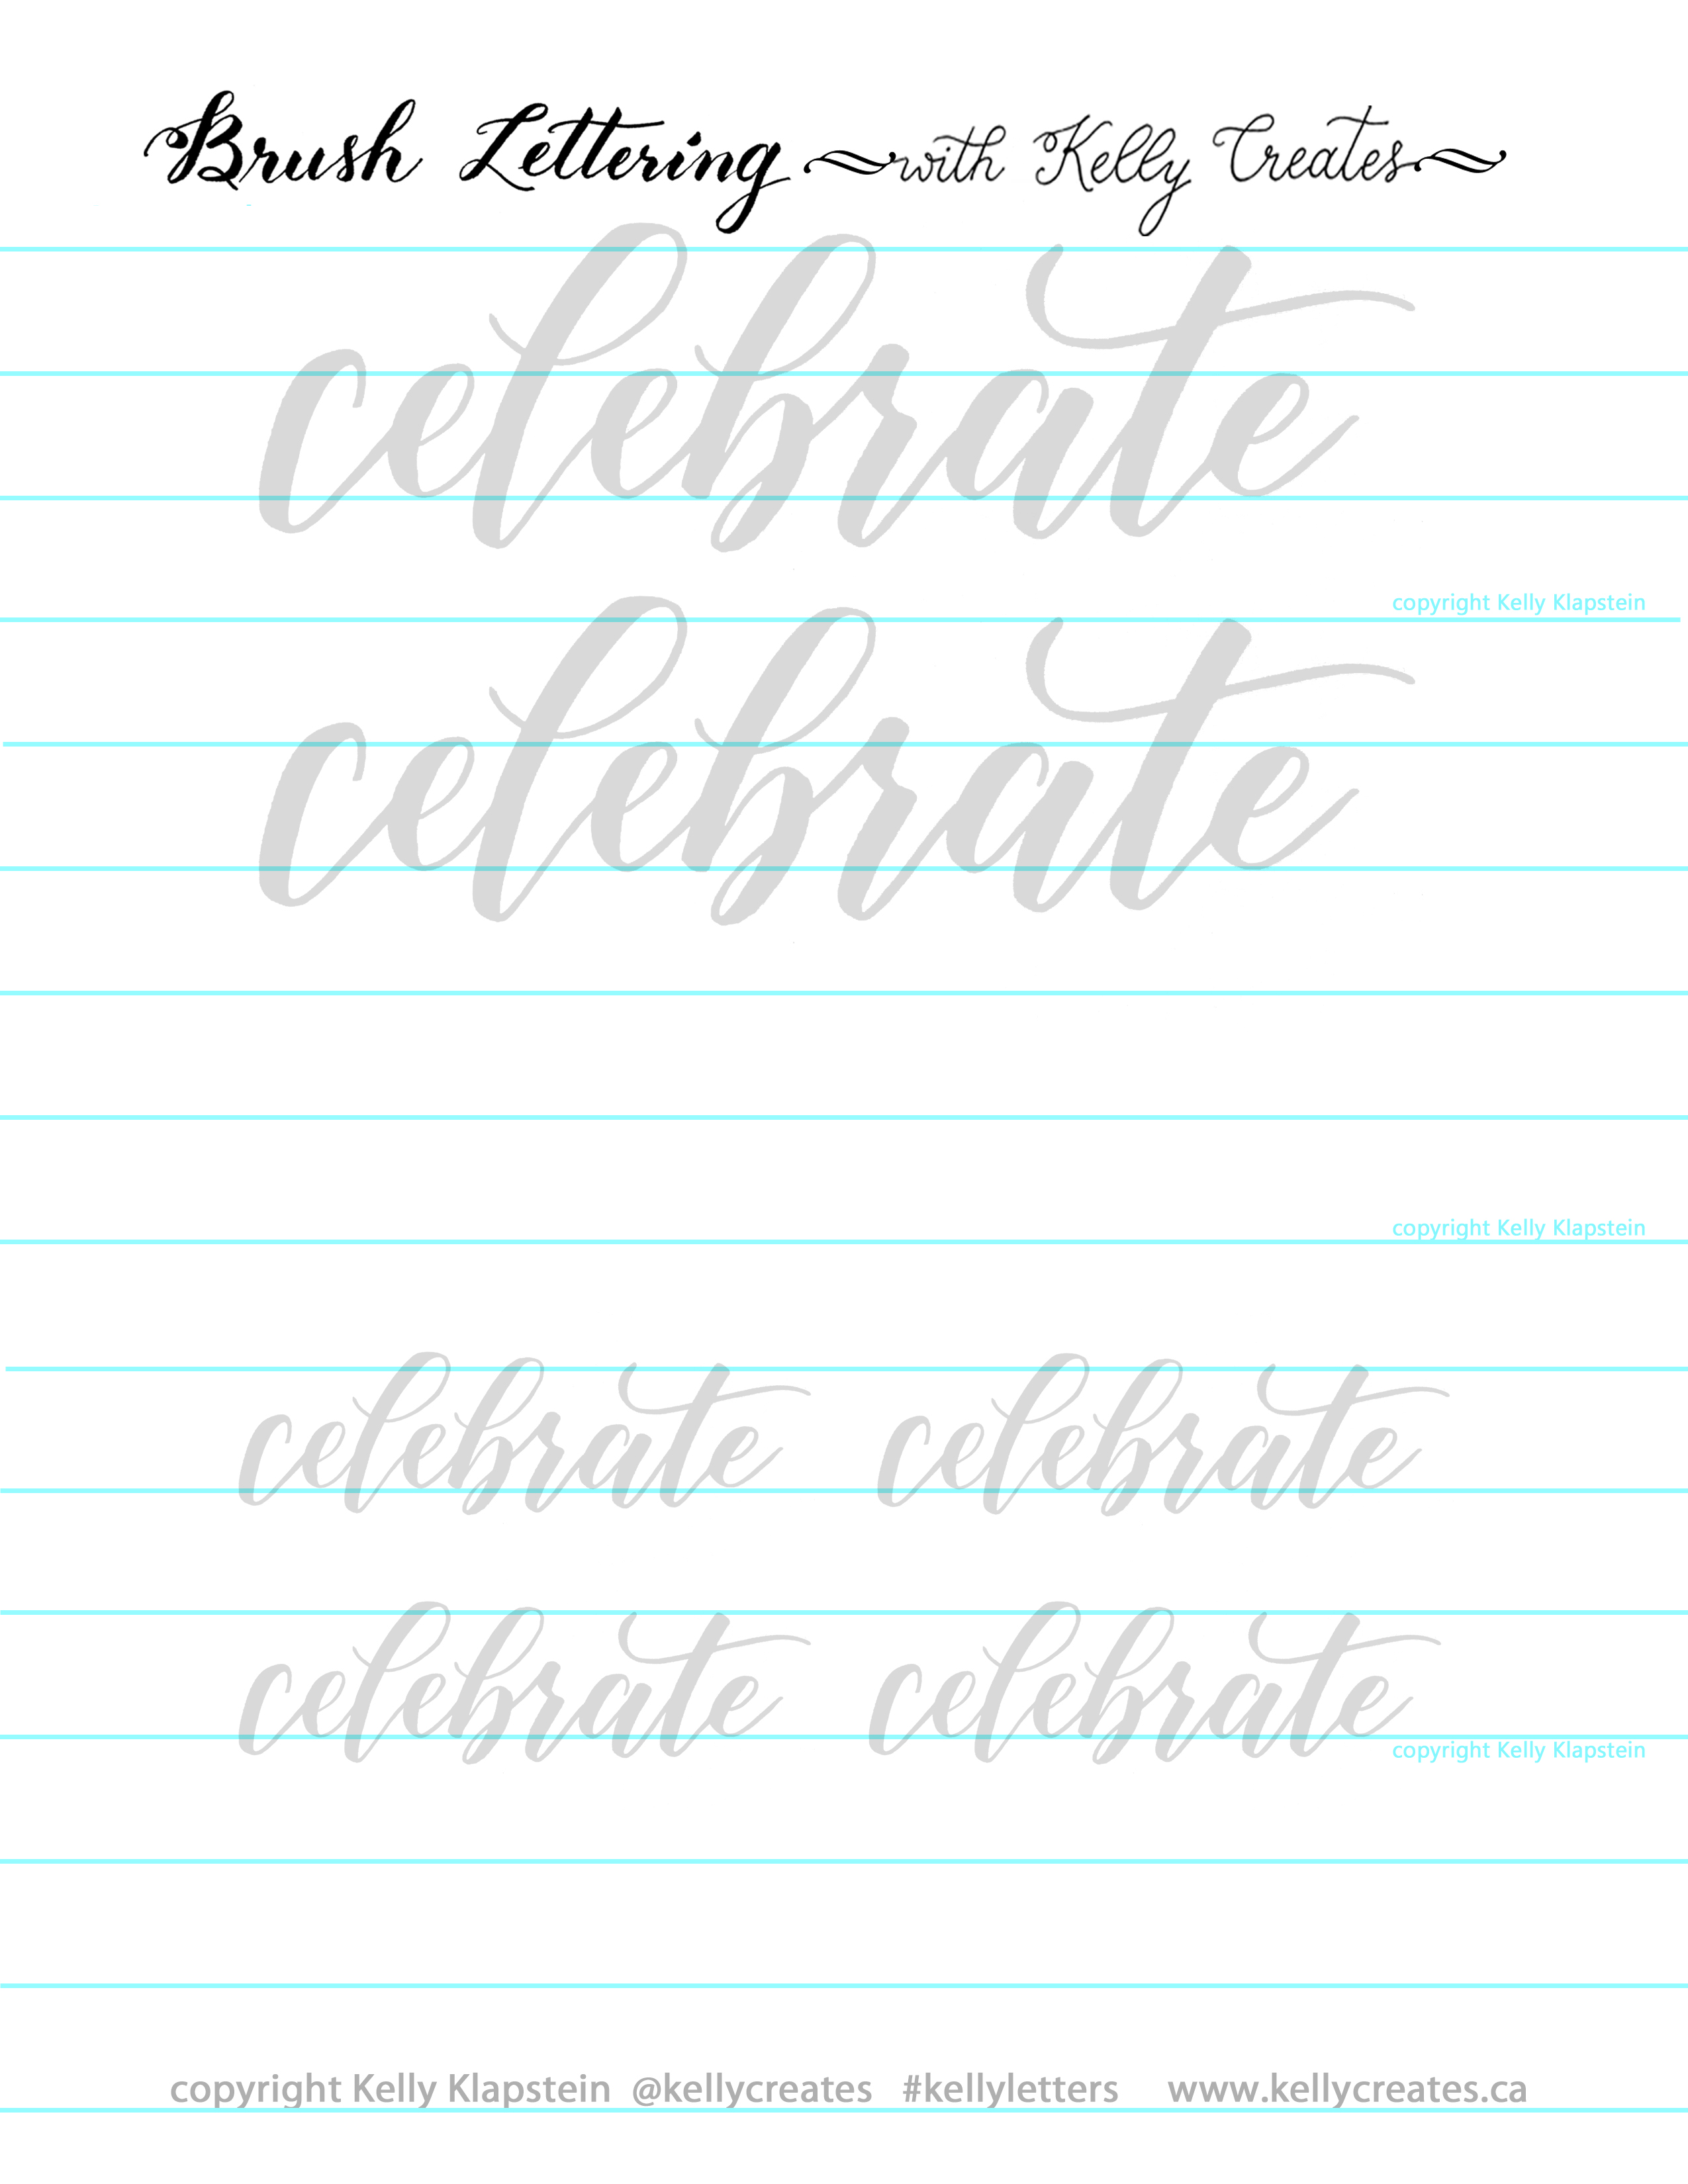 Let's Celebrate with a FREE worksheet! – Kelly Creates